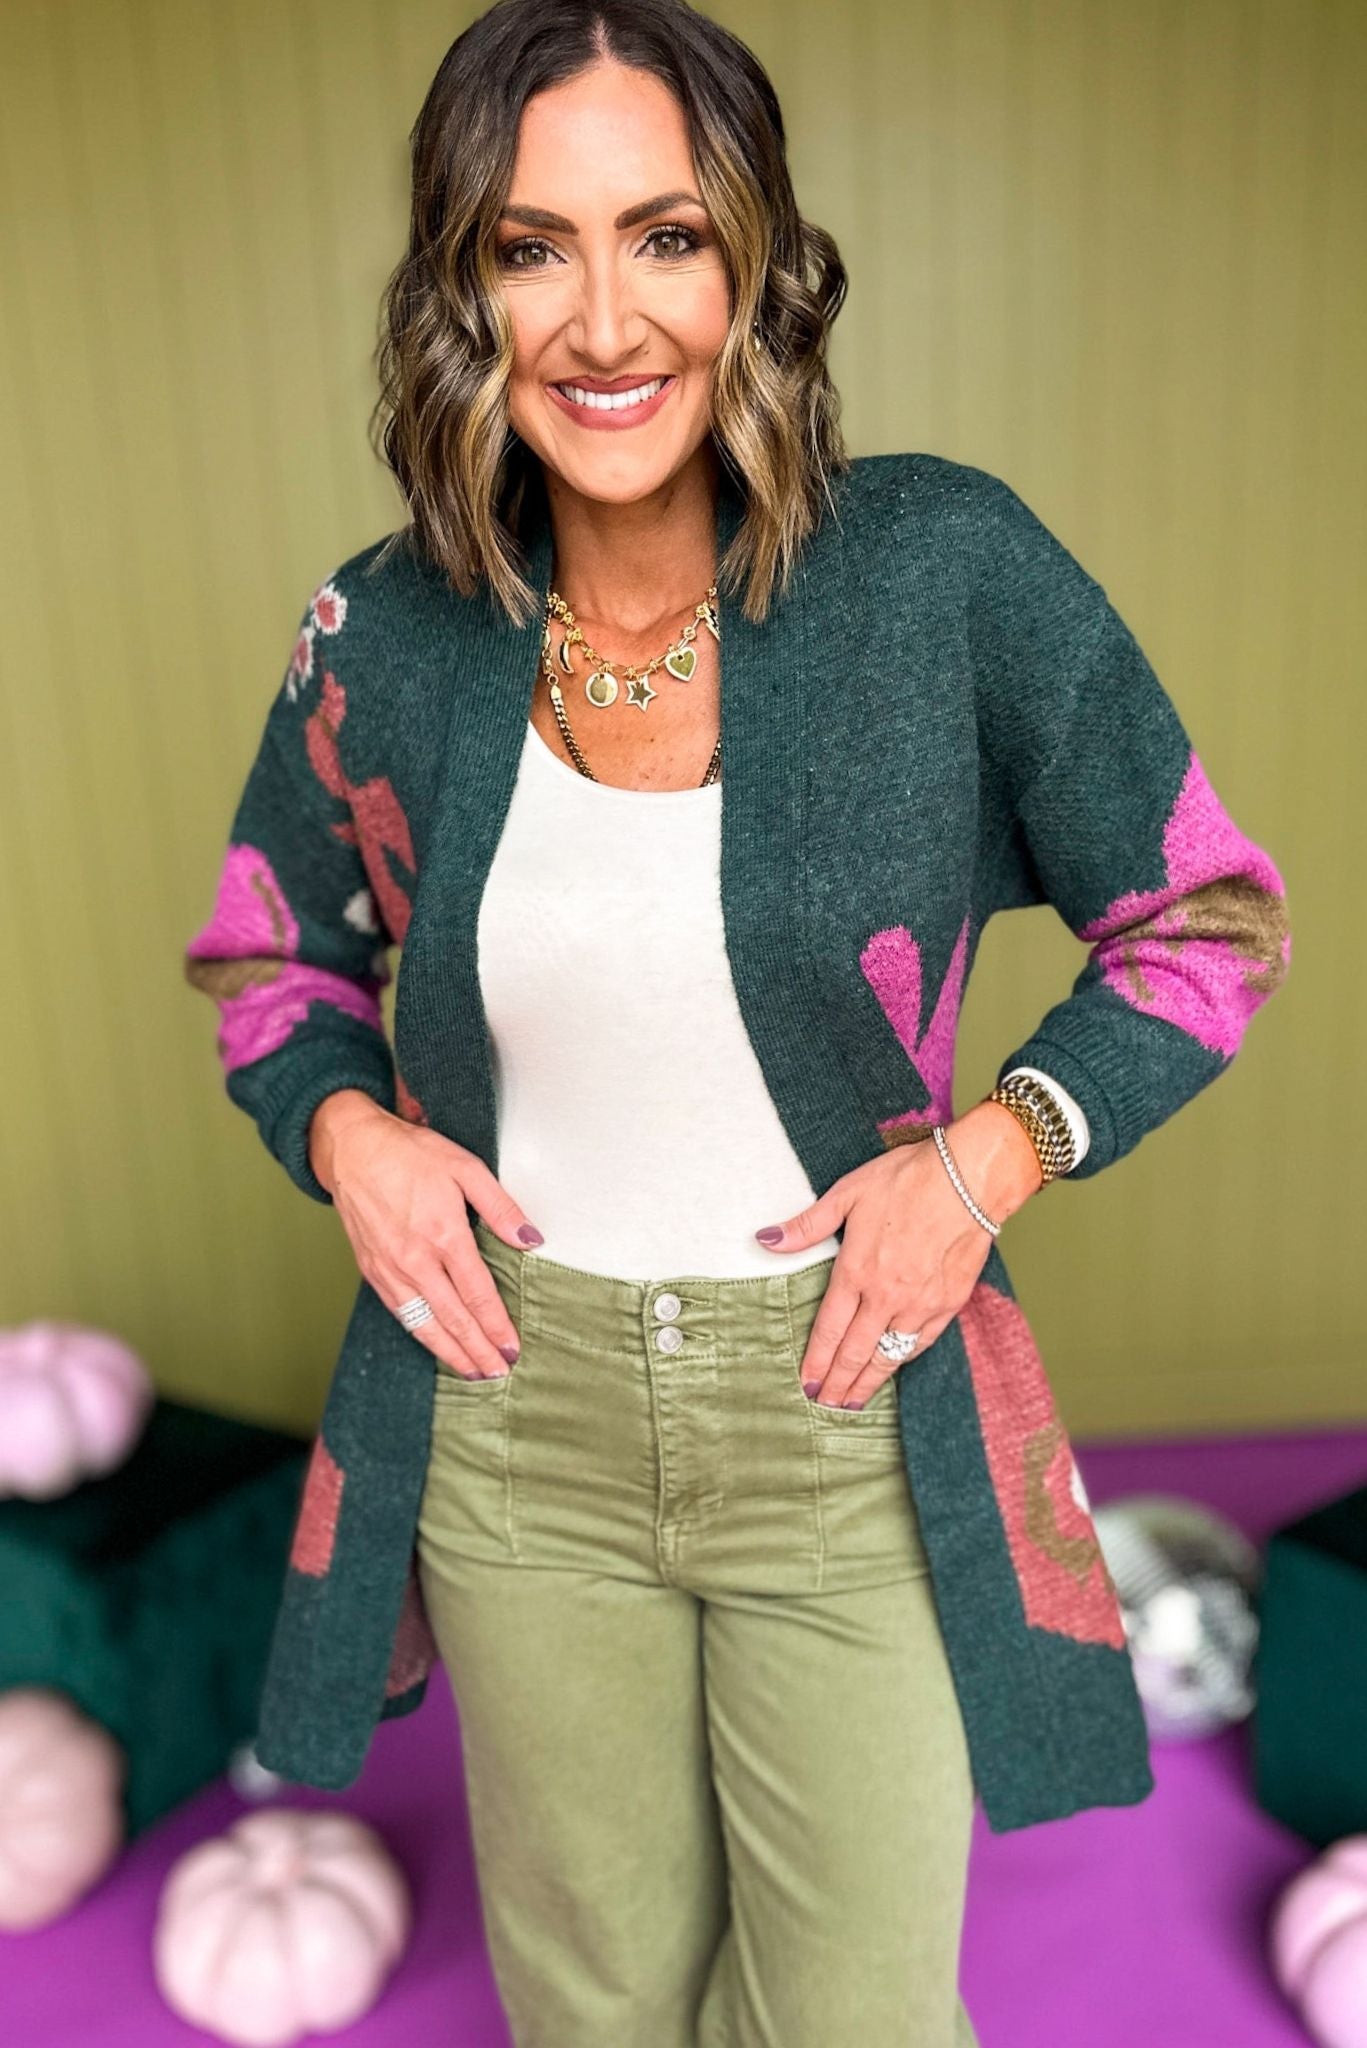 Hunter Green Floral Printed Open Front Cardigan, must have cardigan, must have style, must have fall, fall collection, fall fashion, elevated style, elevated cardigan, mom style, fall style, shop style your senses by mallory fitzsimmons